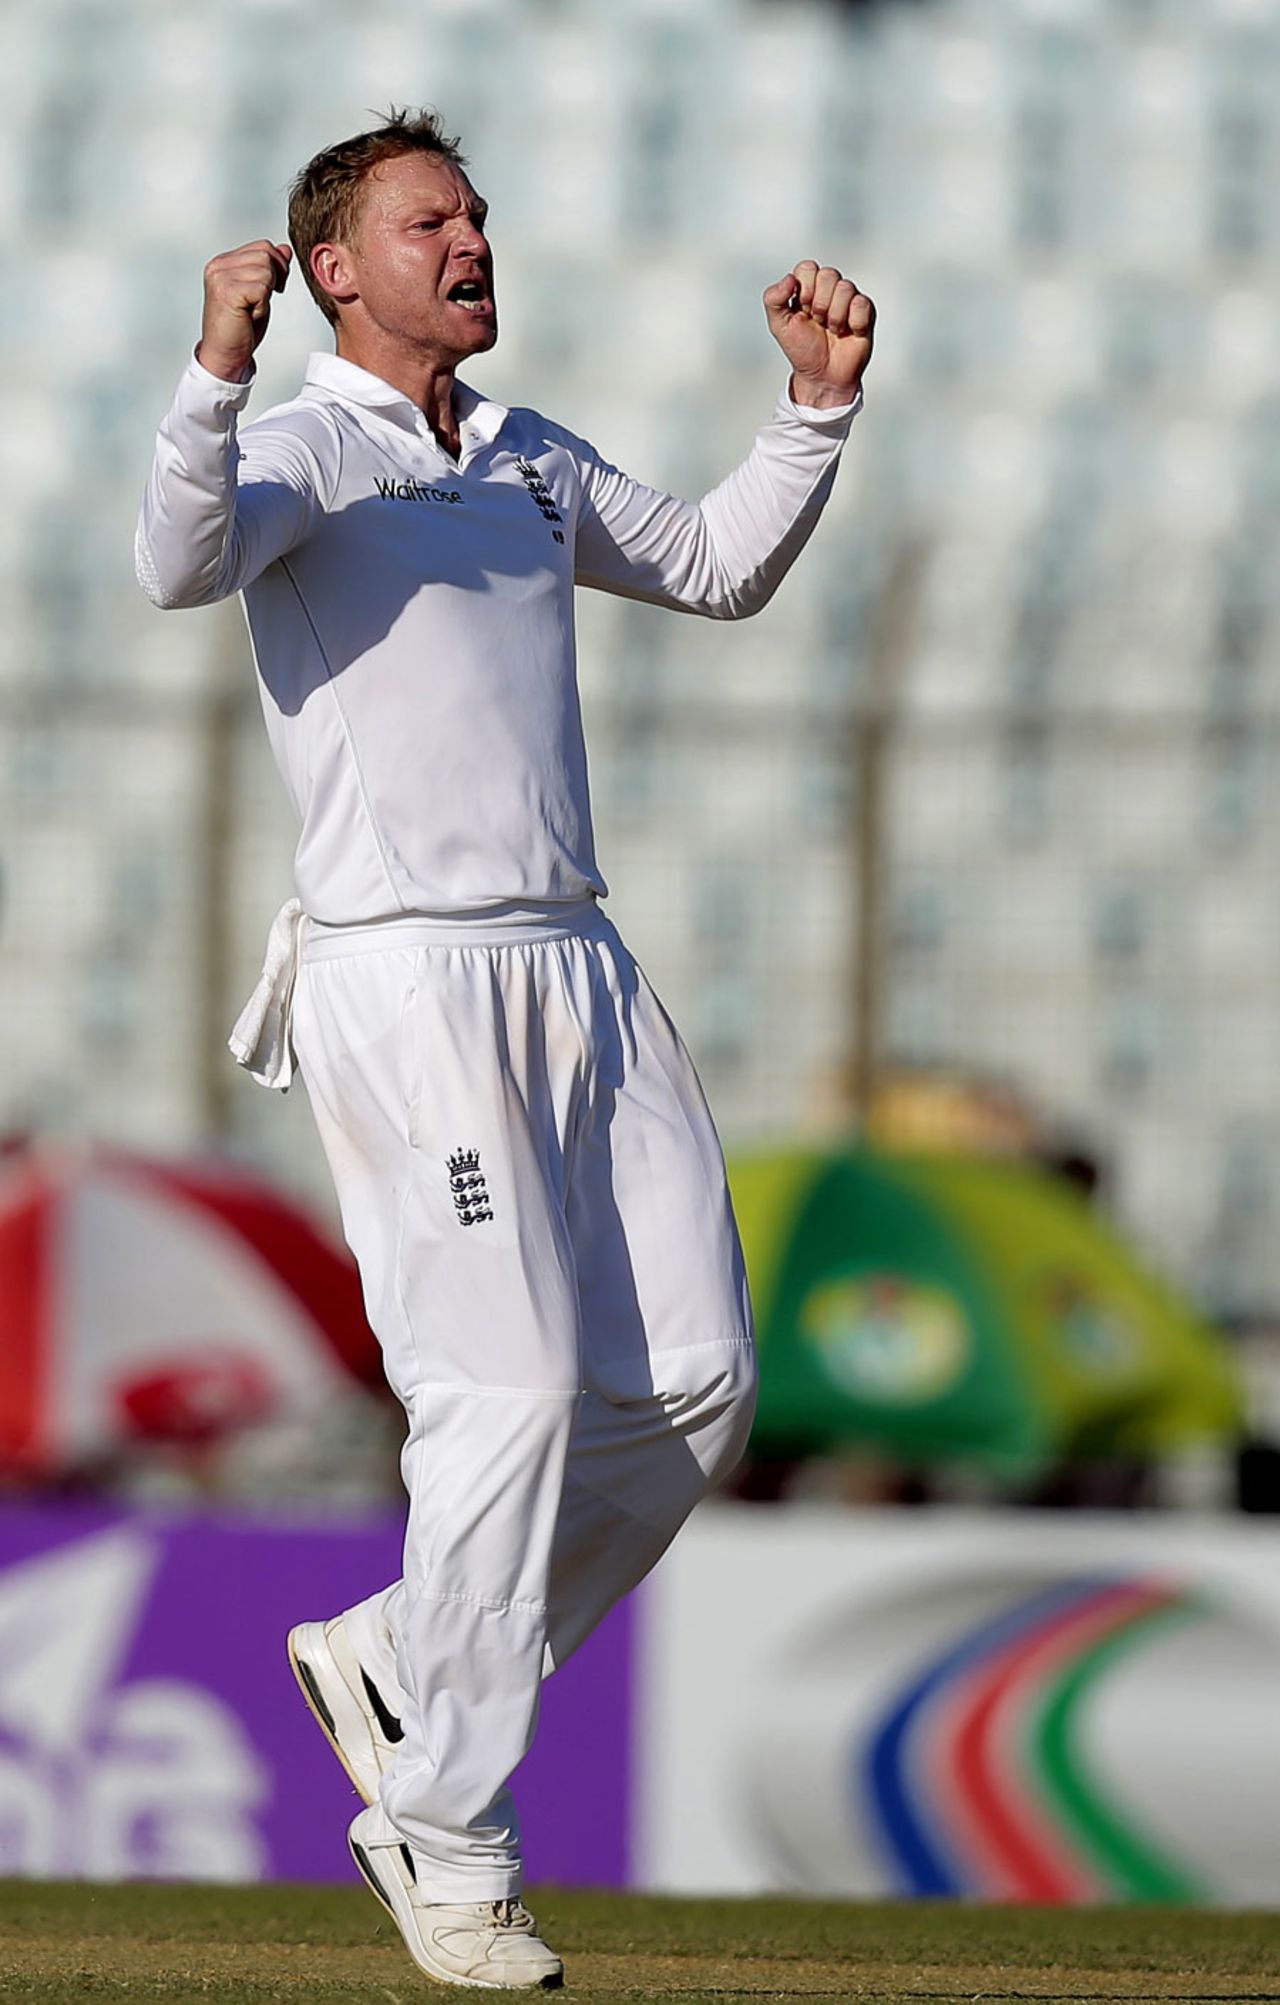 Gareth Batty claimed his first Test wicket since 2005, Bangladesh v England, 1st Test, Chittagong, 2nd day, October 21, 2016